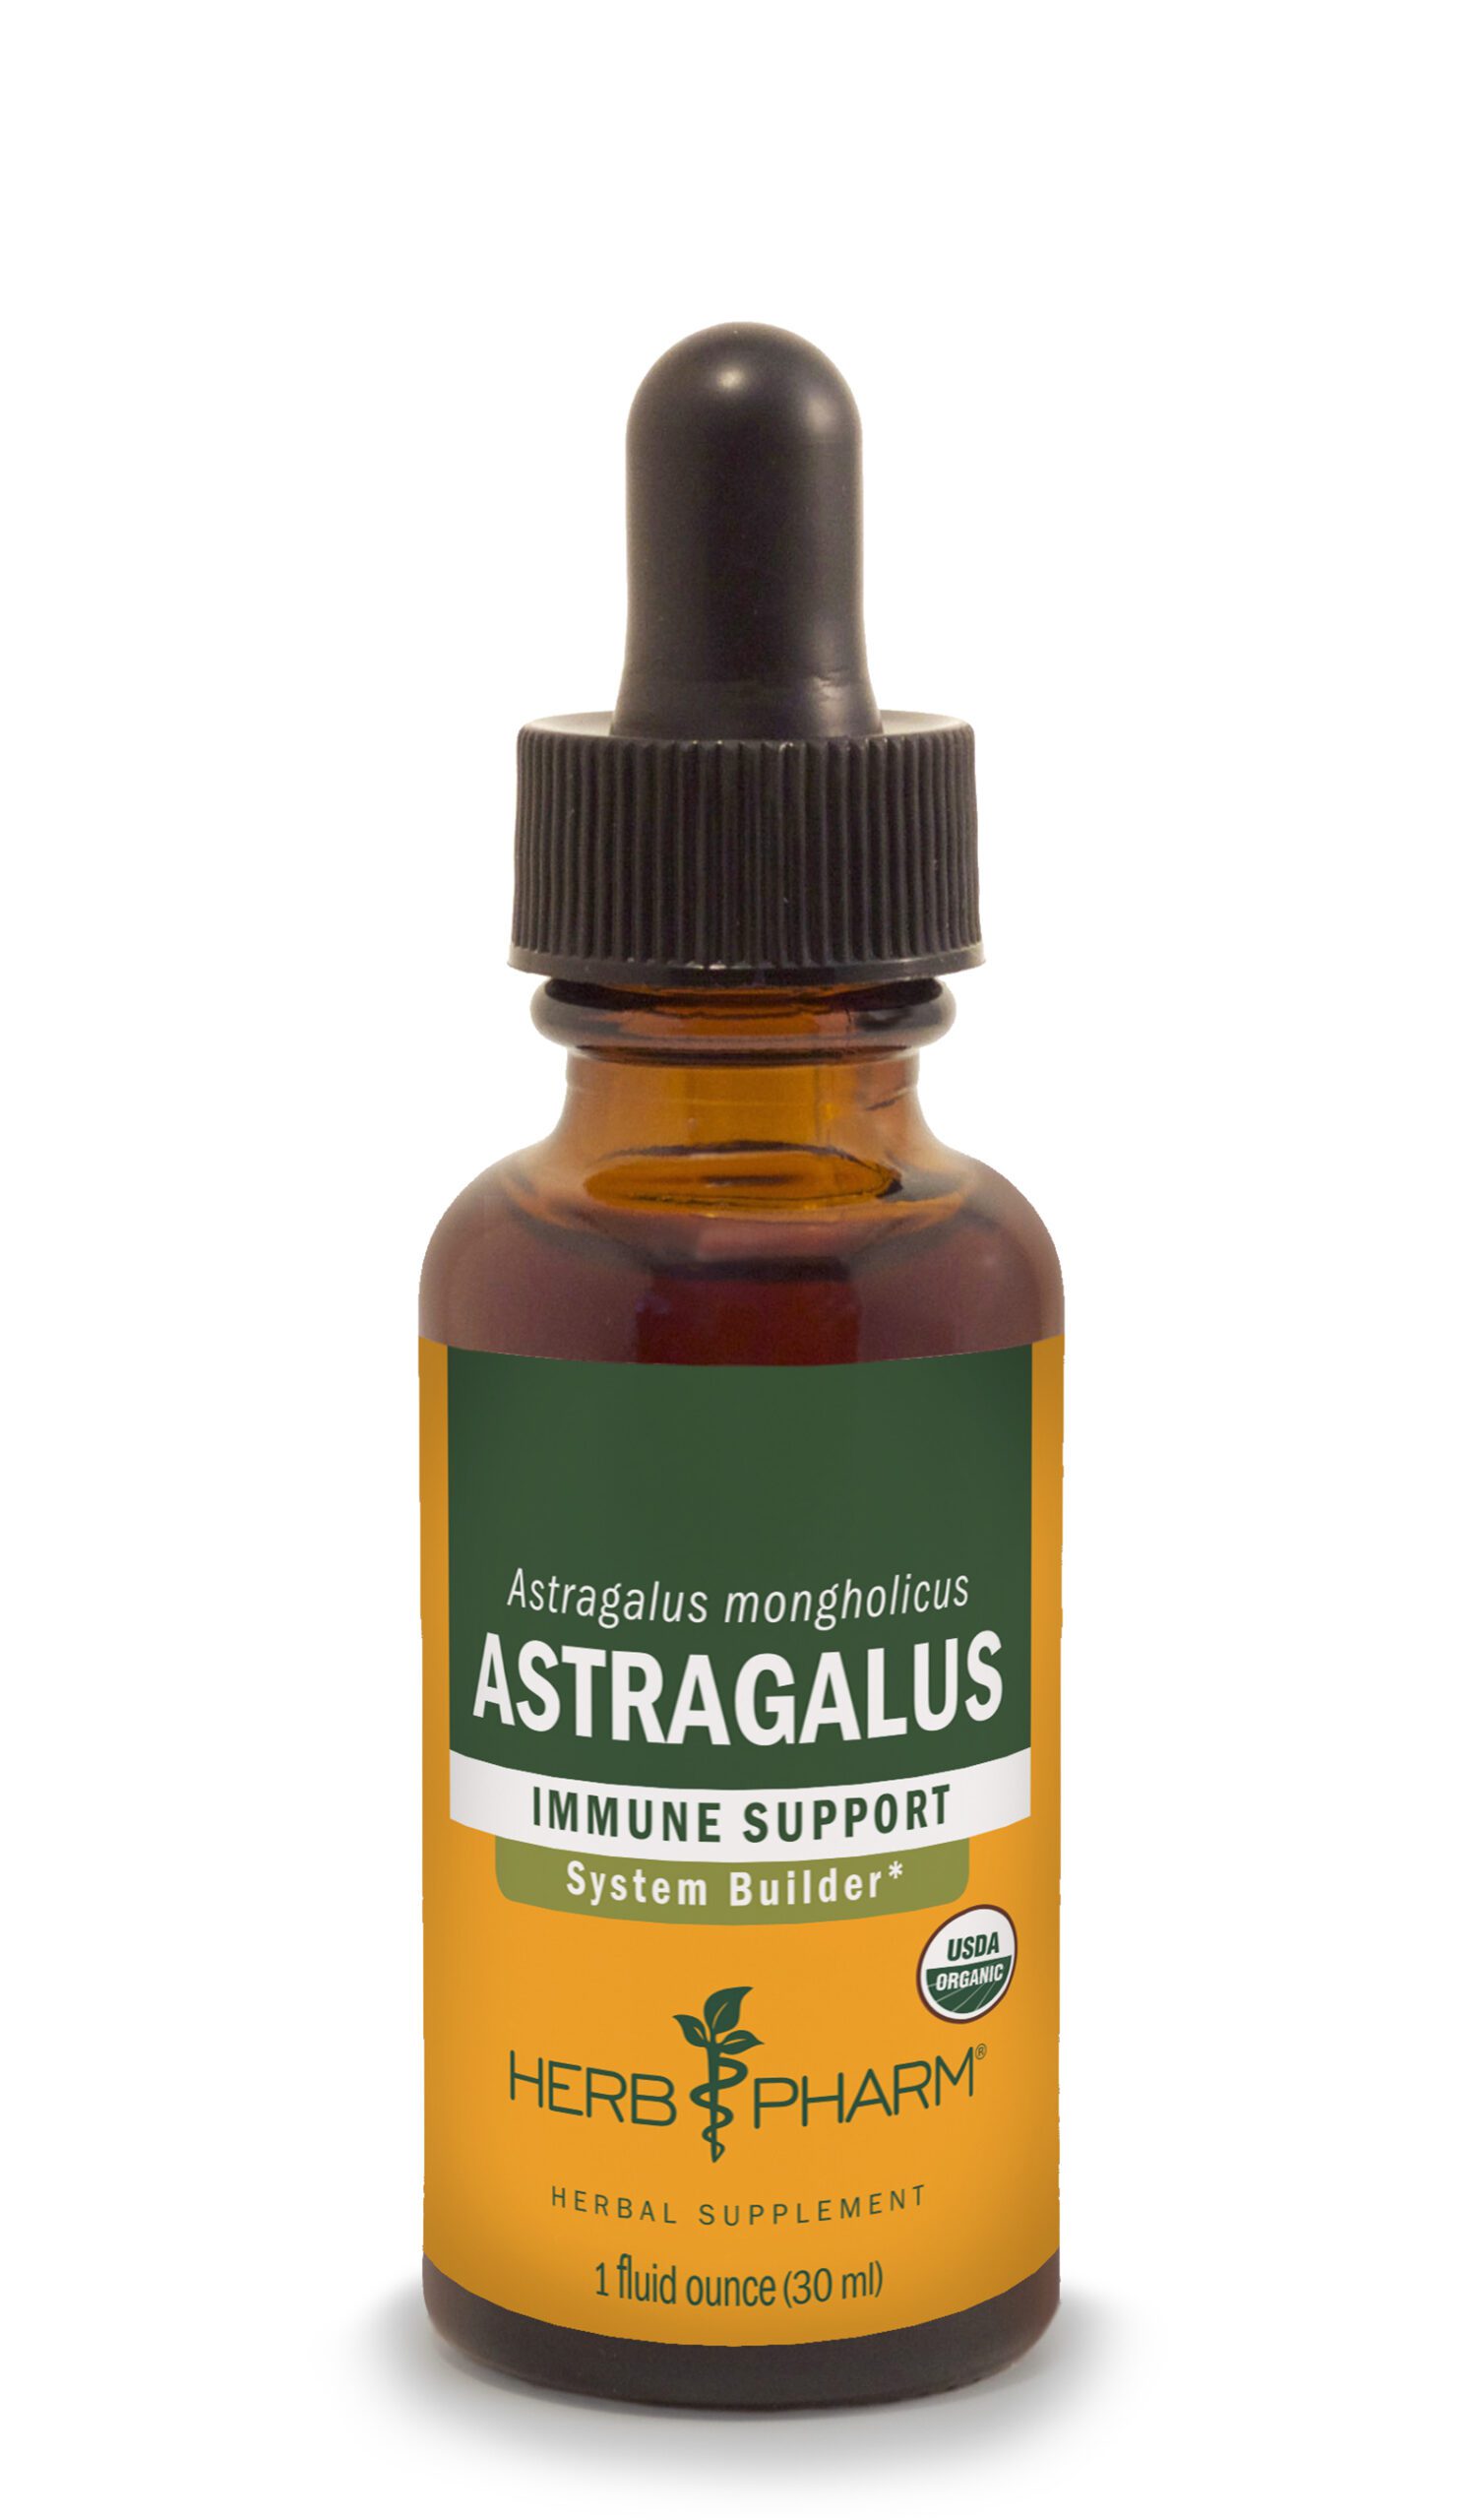 Herb Pharm Astragalus tincture product image